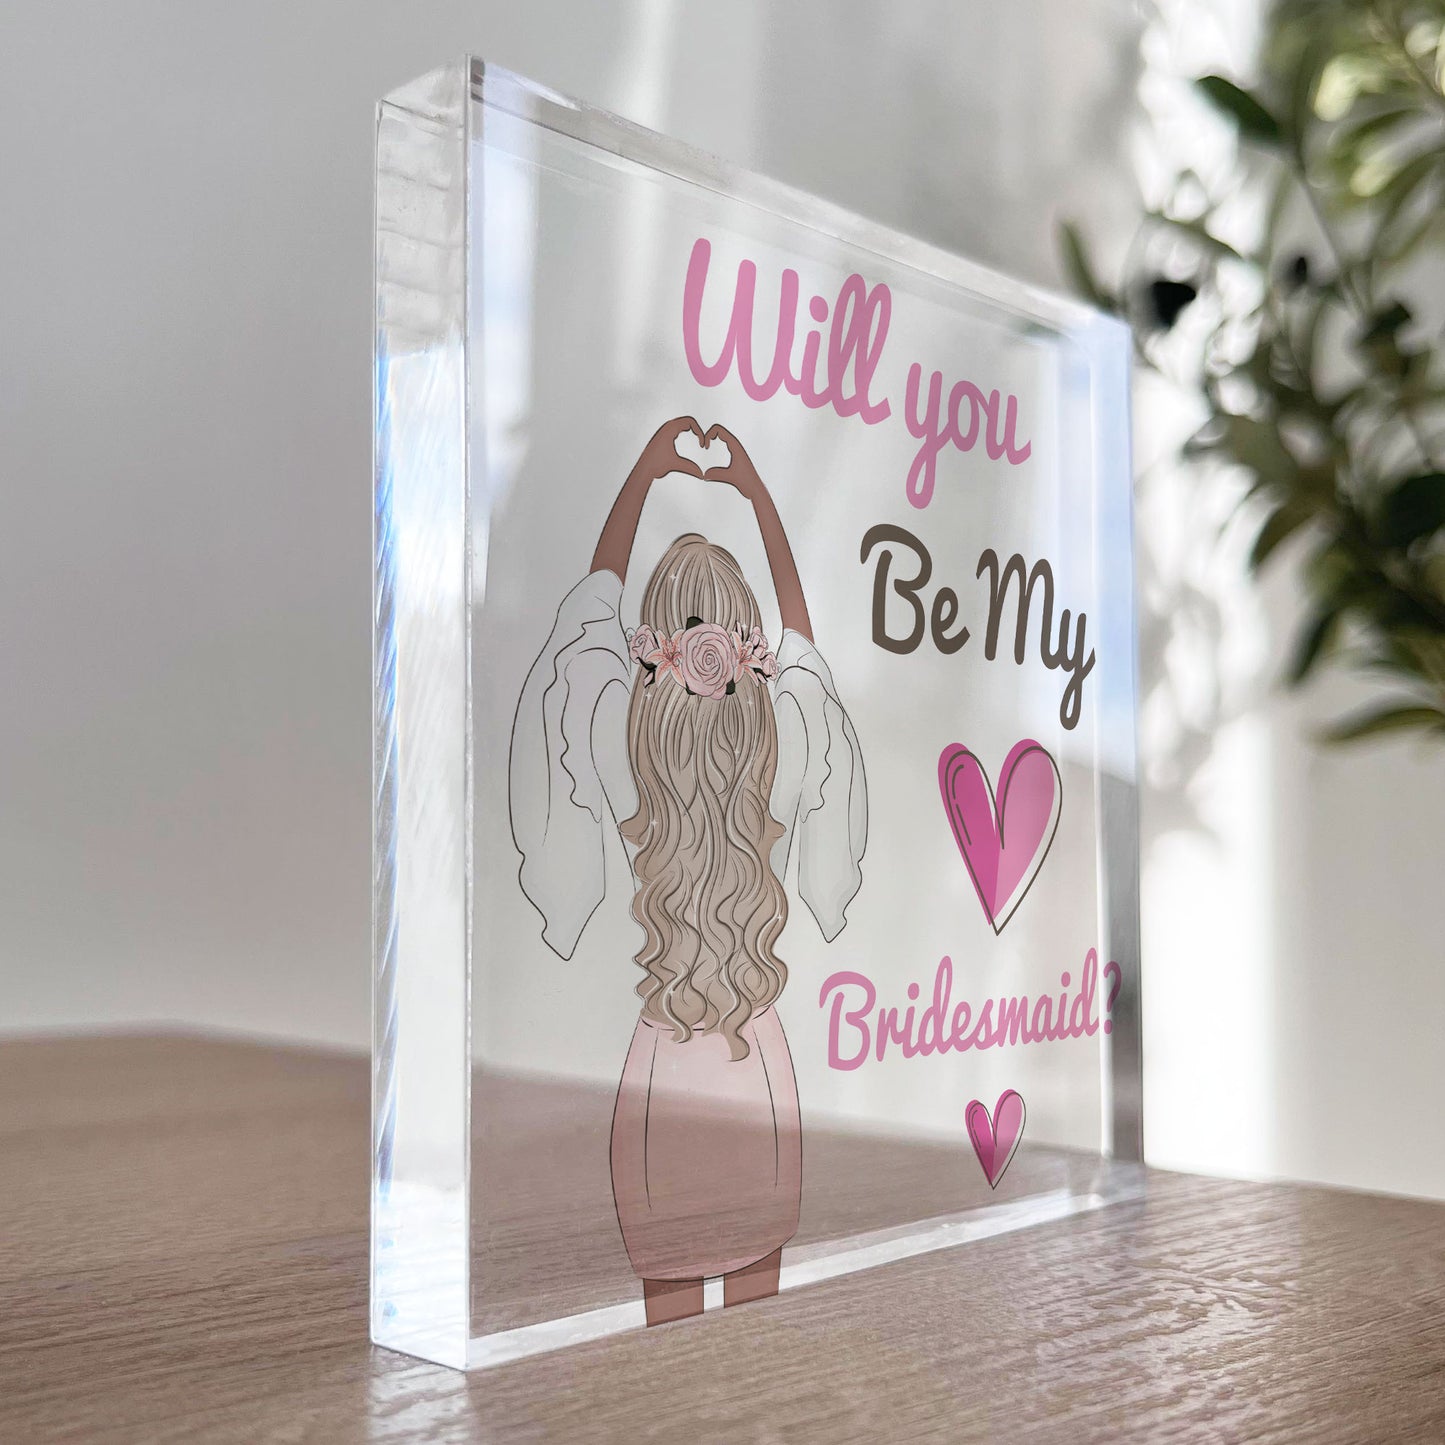 Will You Be My BRIDESMAID Proposal Gift Wedding Gifts